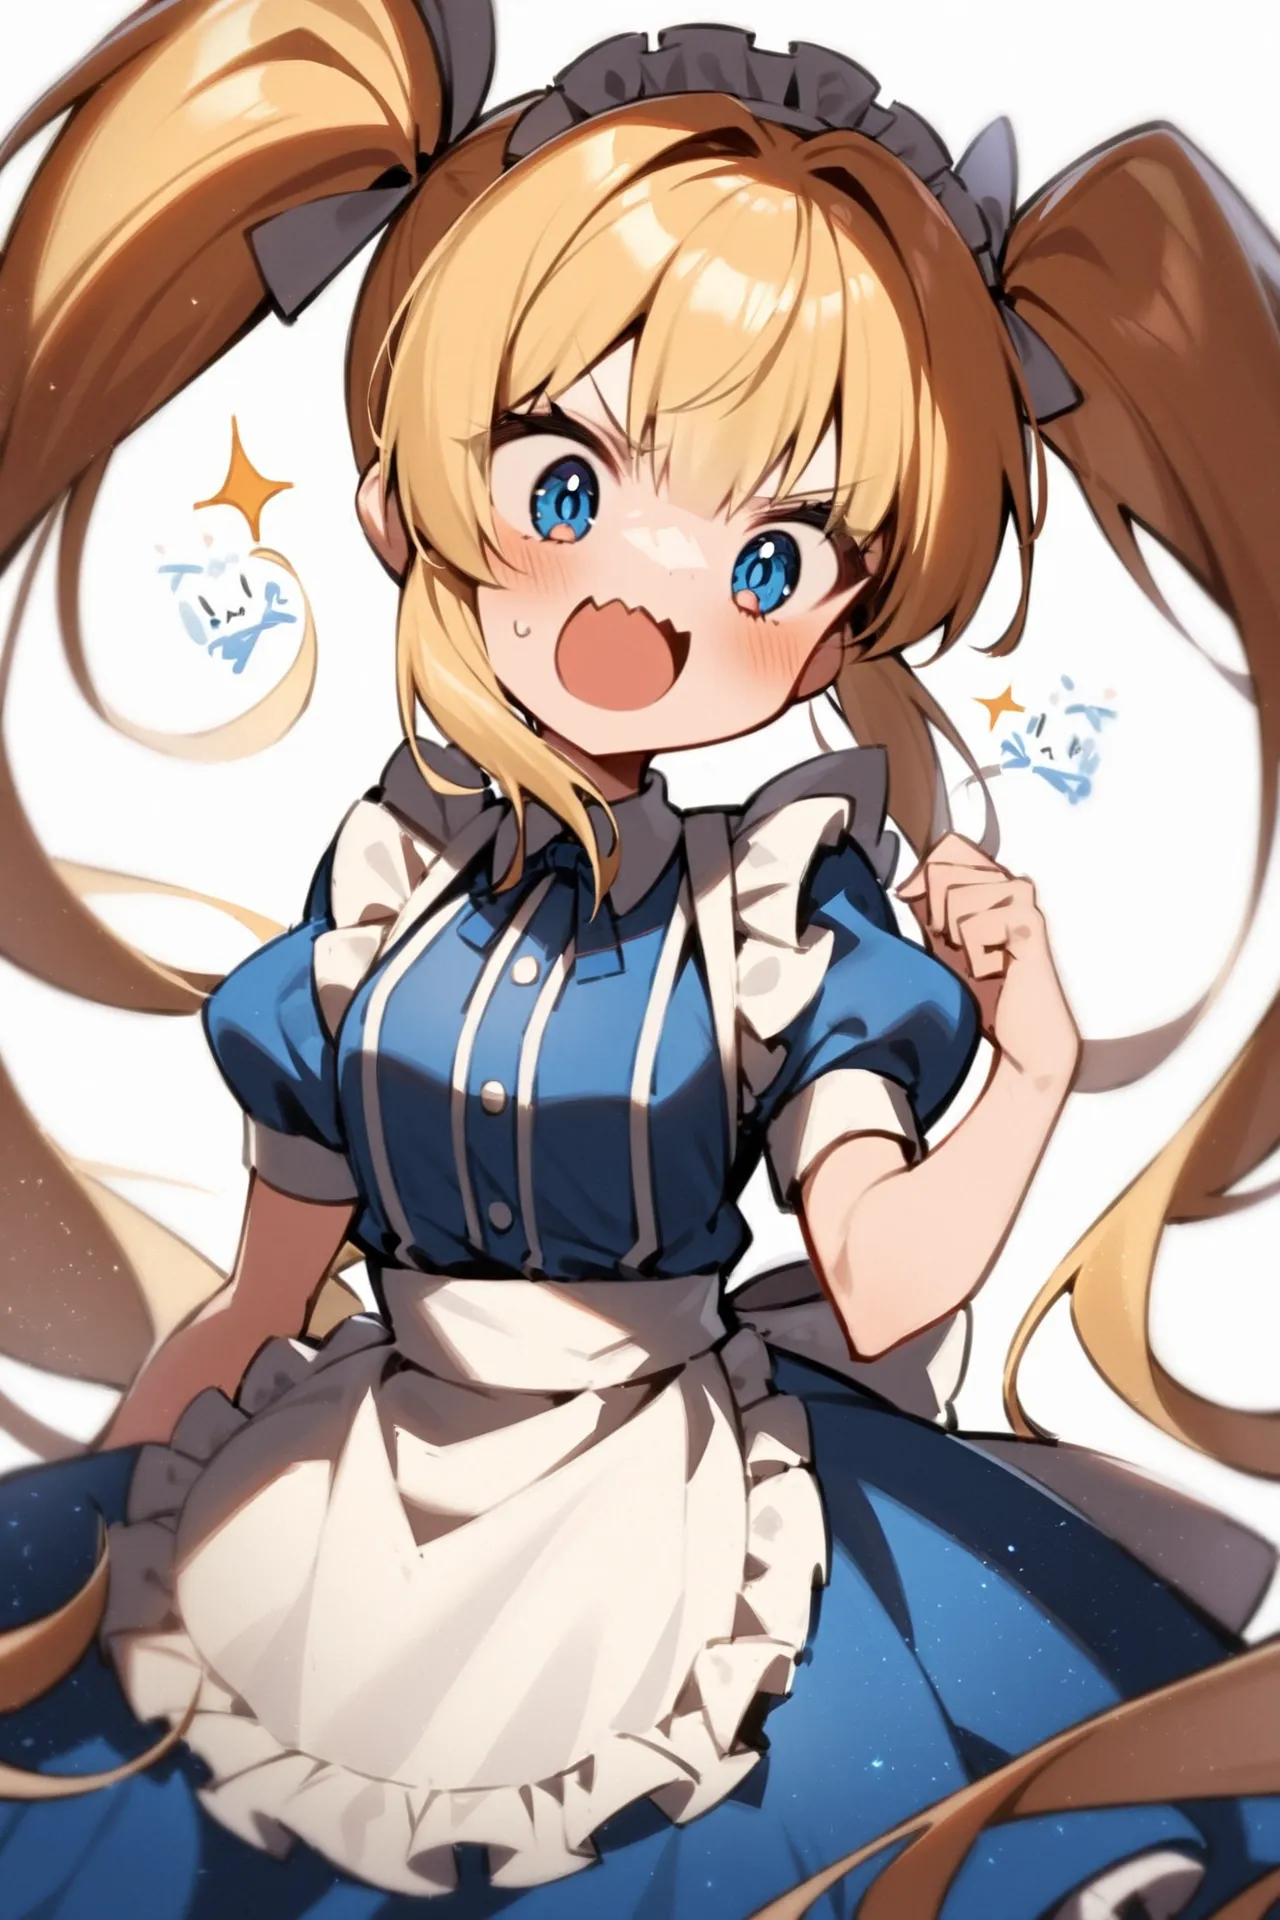 '1girl, >:(,\nblonde hair, twintails, blue dress, white apron,\nwhite background,\nAlice in glitterworld\nNegative prompt: (worst quality, low quality:1.4), nsfw\nSteps: 35, Sampler: DPM++ 2M SDE Karras, CFG scale: 7, Seed: 1, Size: 640x960, Model hash: 642b08ca49, Model: ConfusionXL2.0_fp16_vae, VAE hash: 63aeecb90f, VAE: sdxl_vae_0.9.safetensors, Denoising strength: 0.6, Clip skip: 2, Hires upscale: 2, Hires steps: 15, Hires upscaler: ESRGAN_4x, Eta: 0.68, Version: v1.7.0'